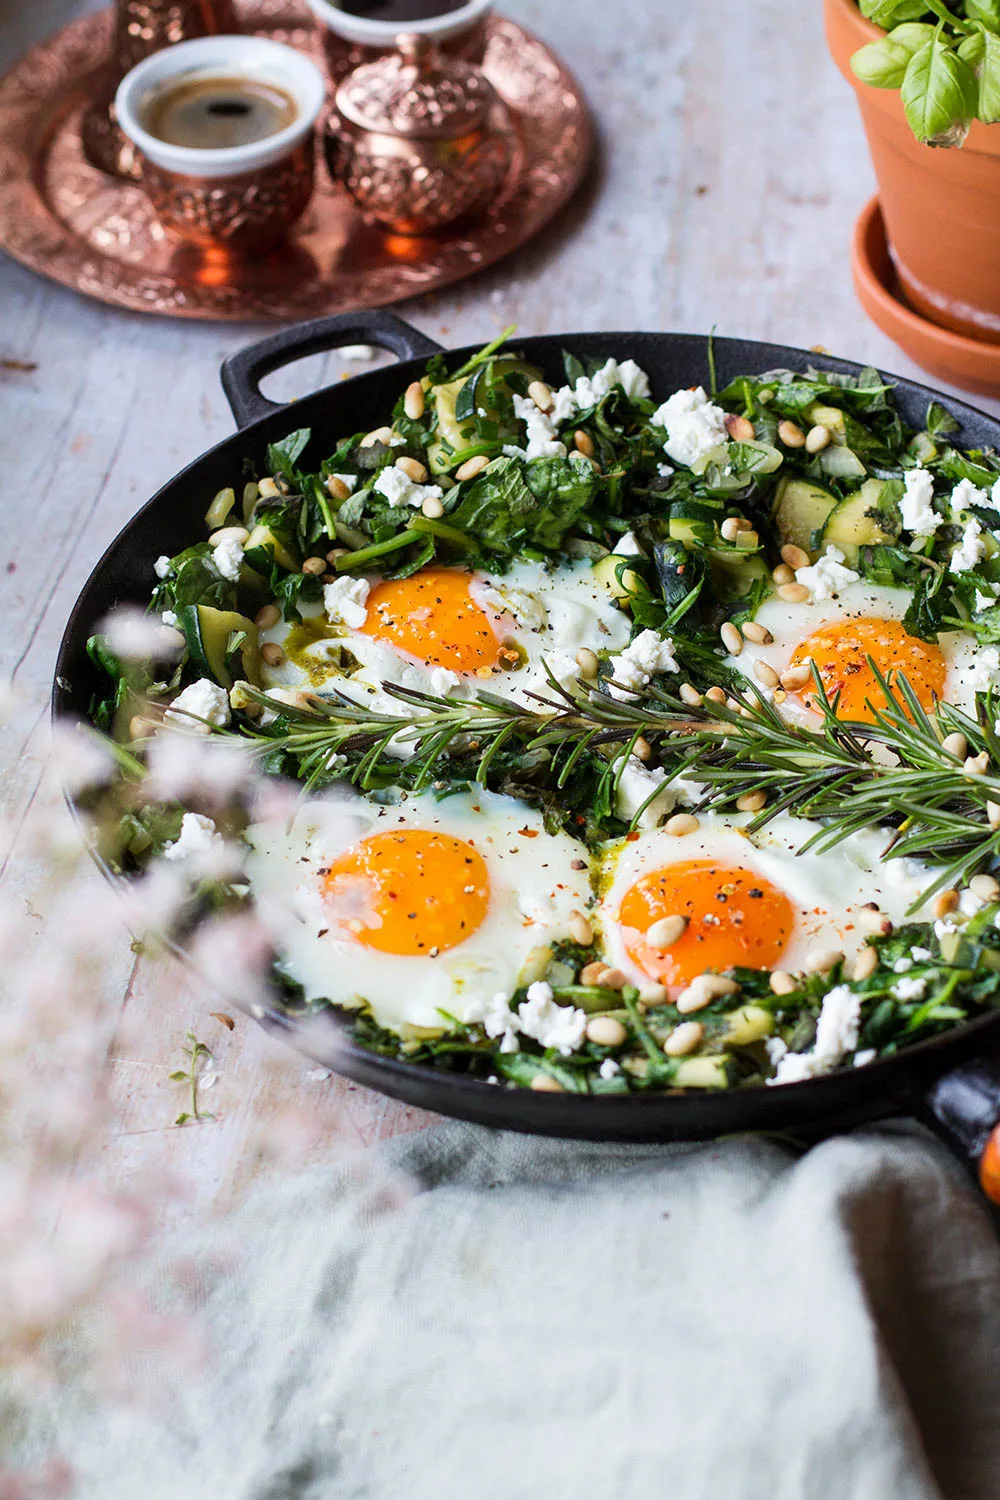 Four sunny-side-up eggs in a bed of greens in a skillet.